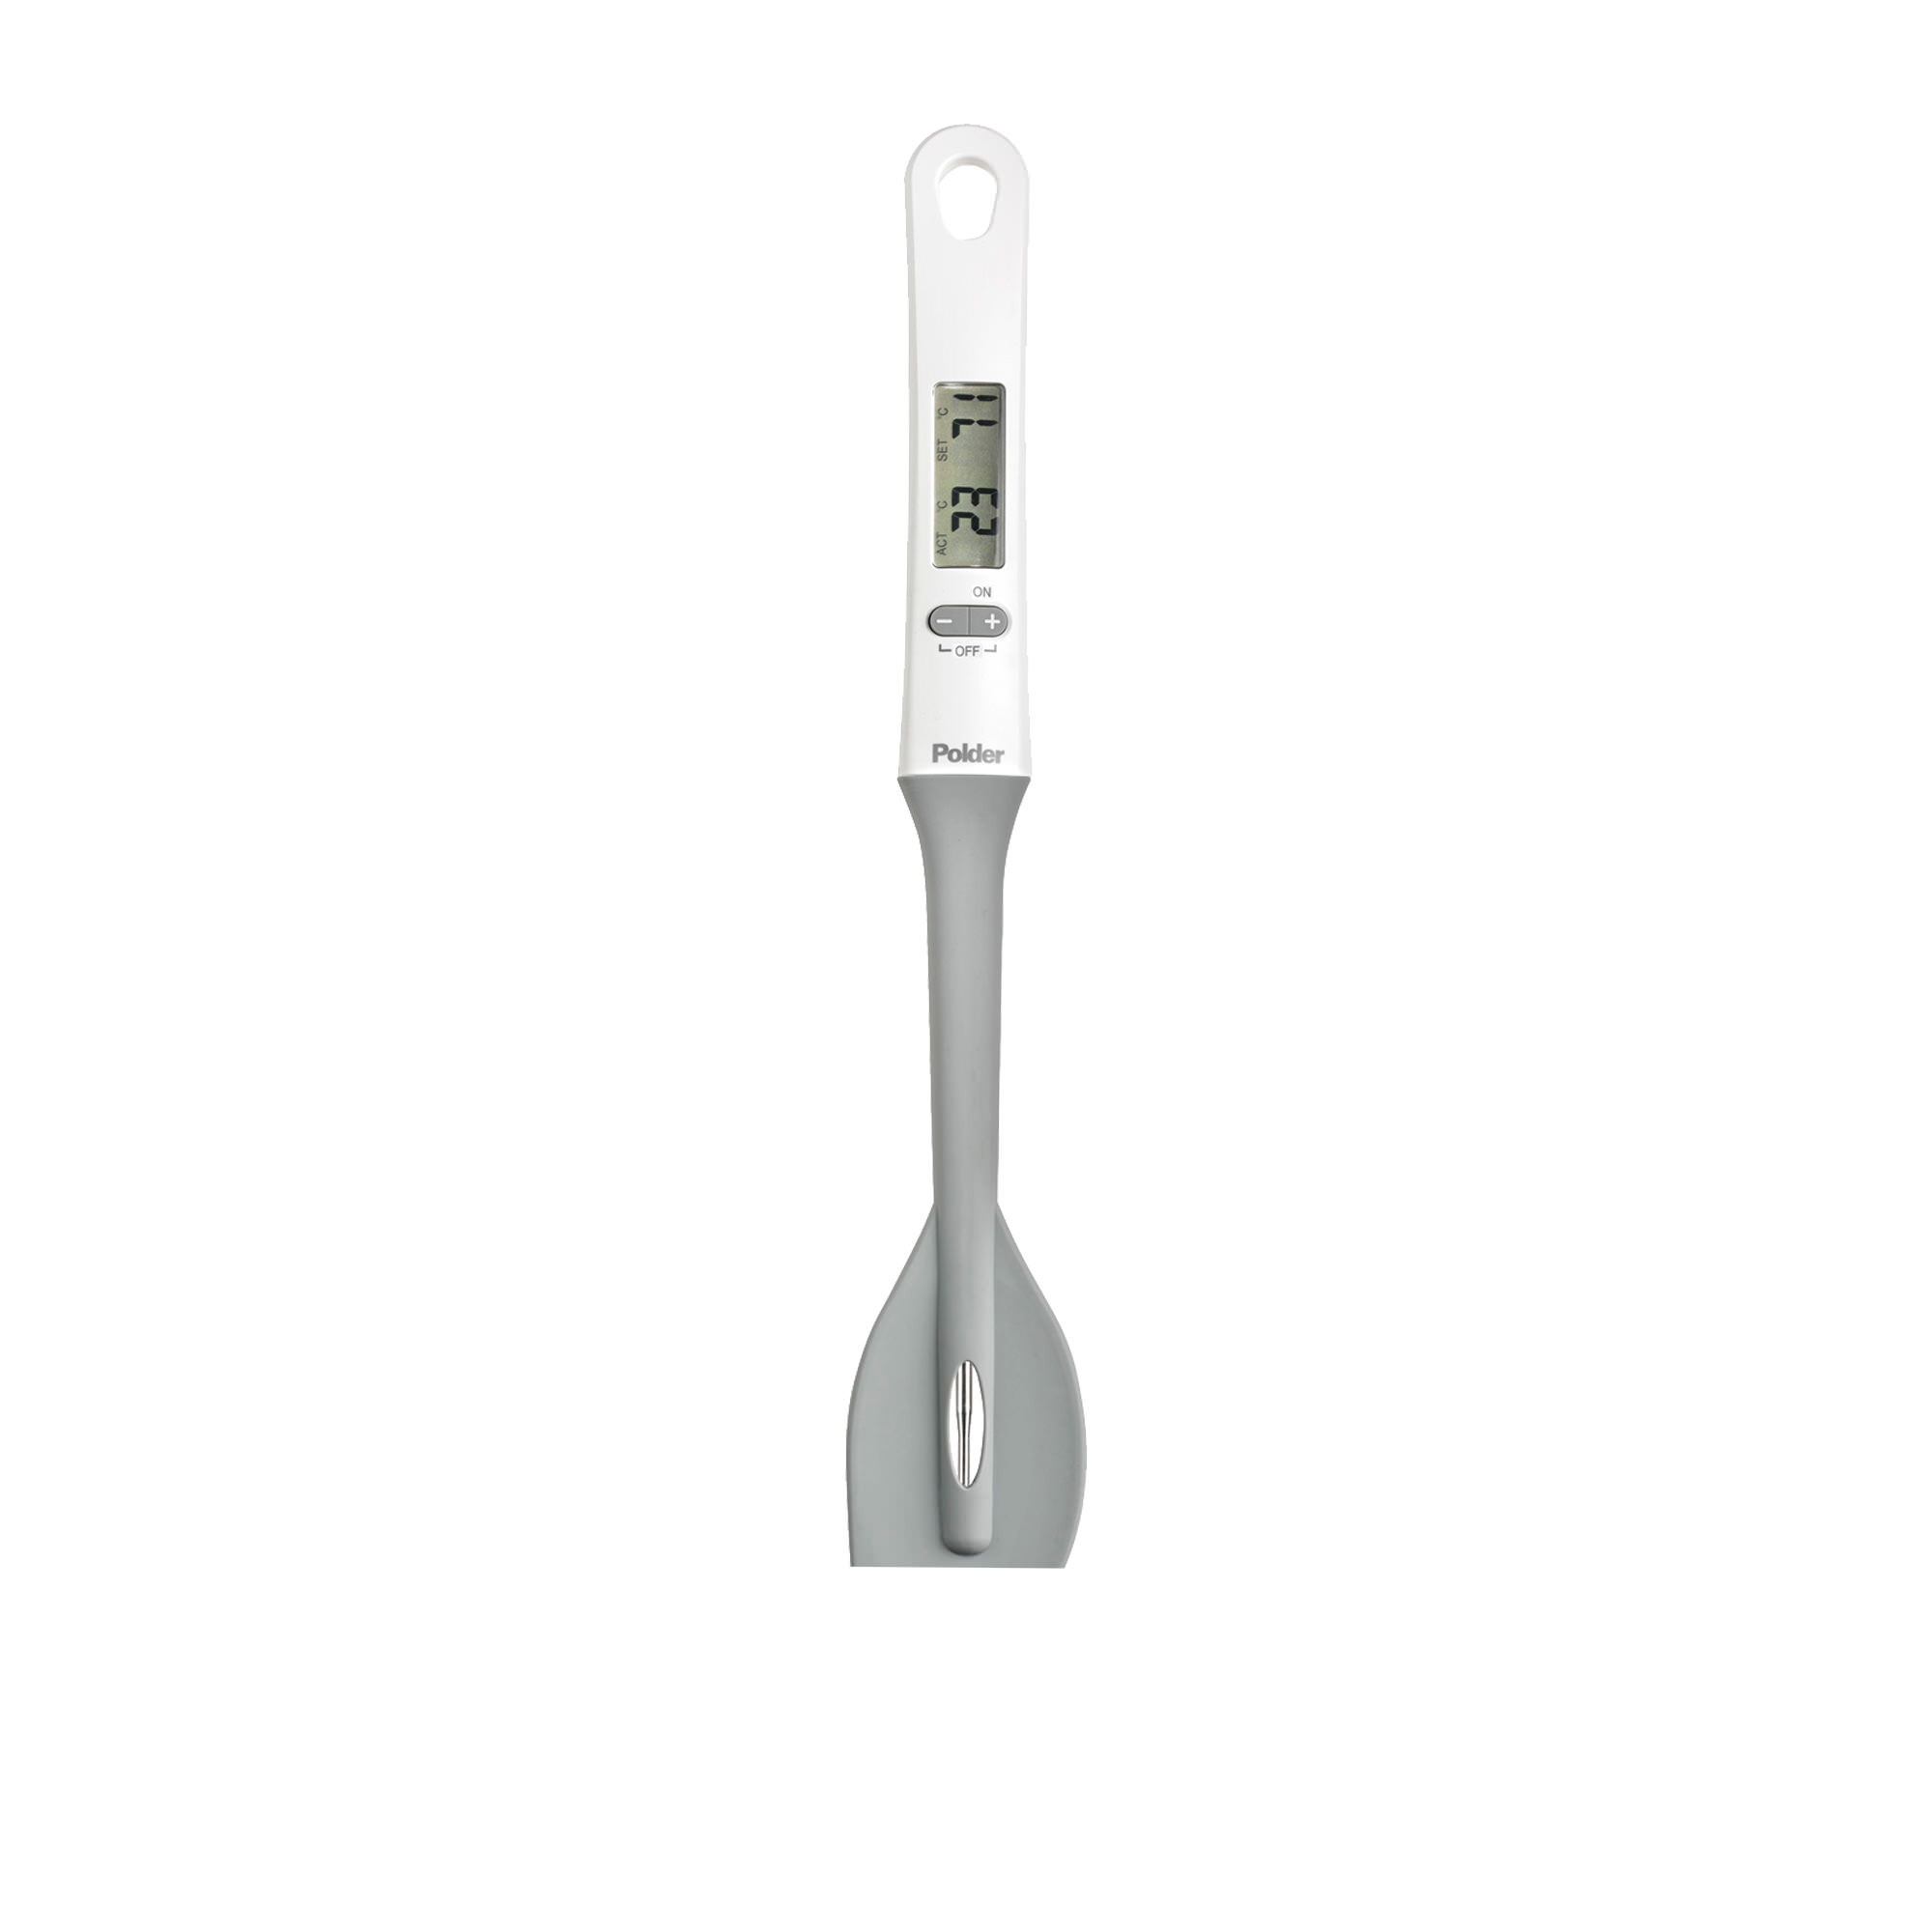 Polder Digital Baking & Candy Thermometer Image 1